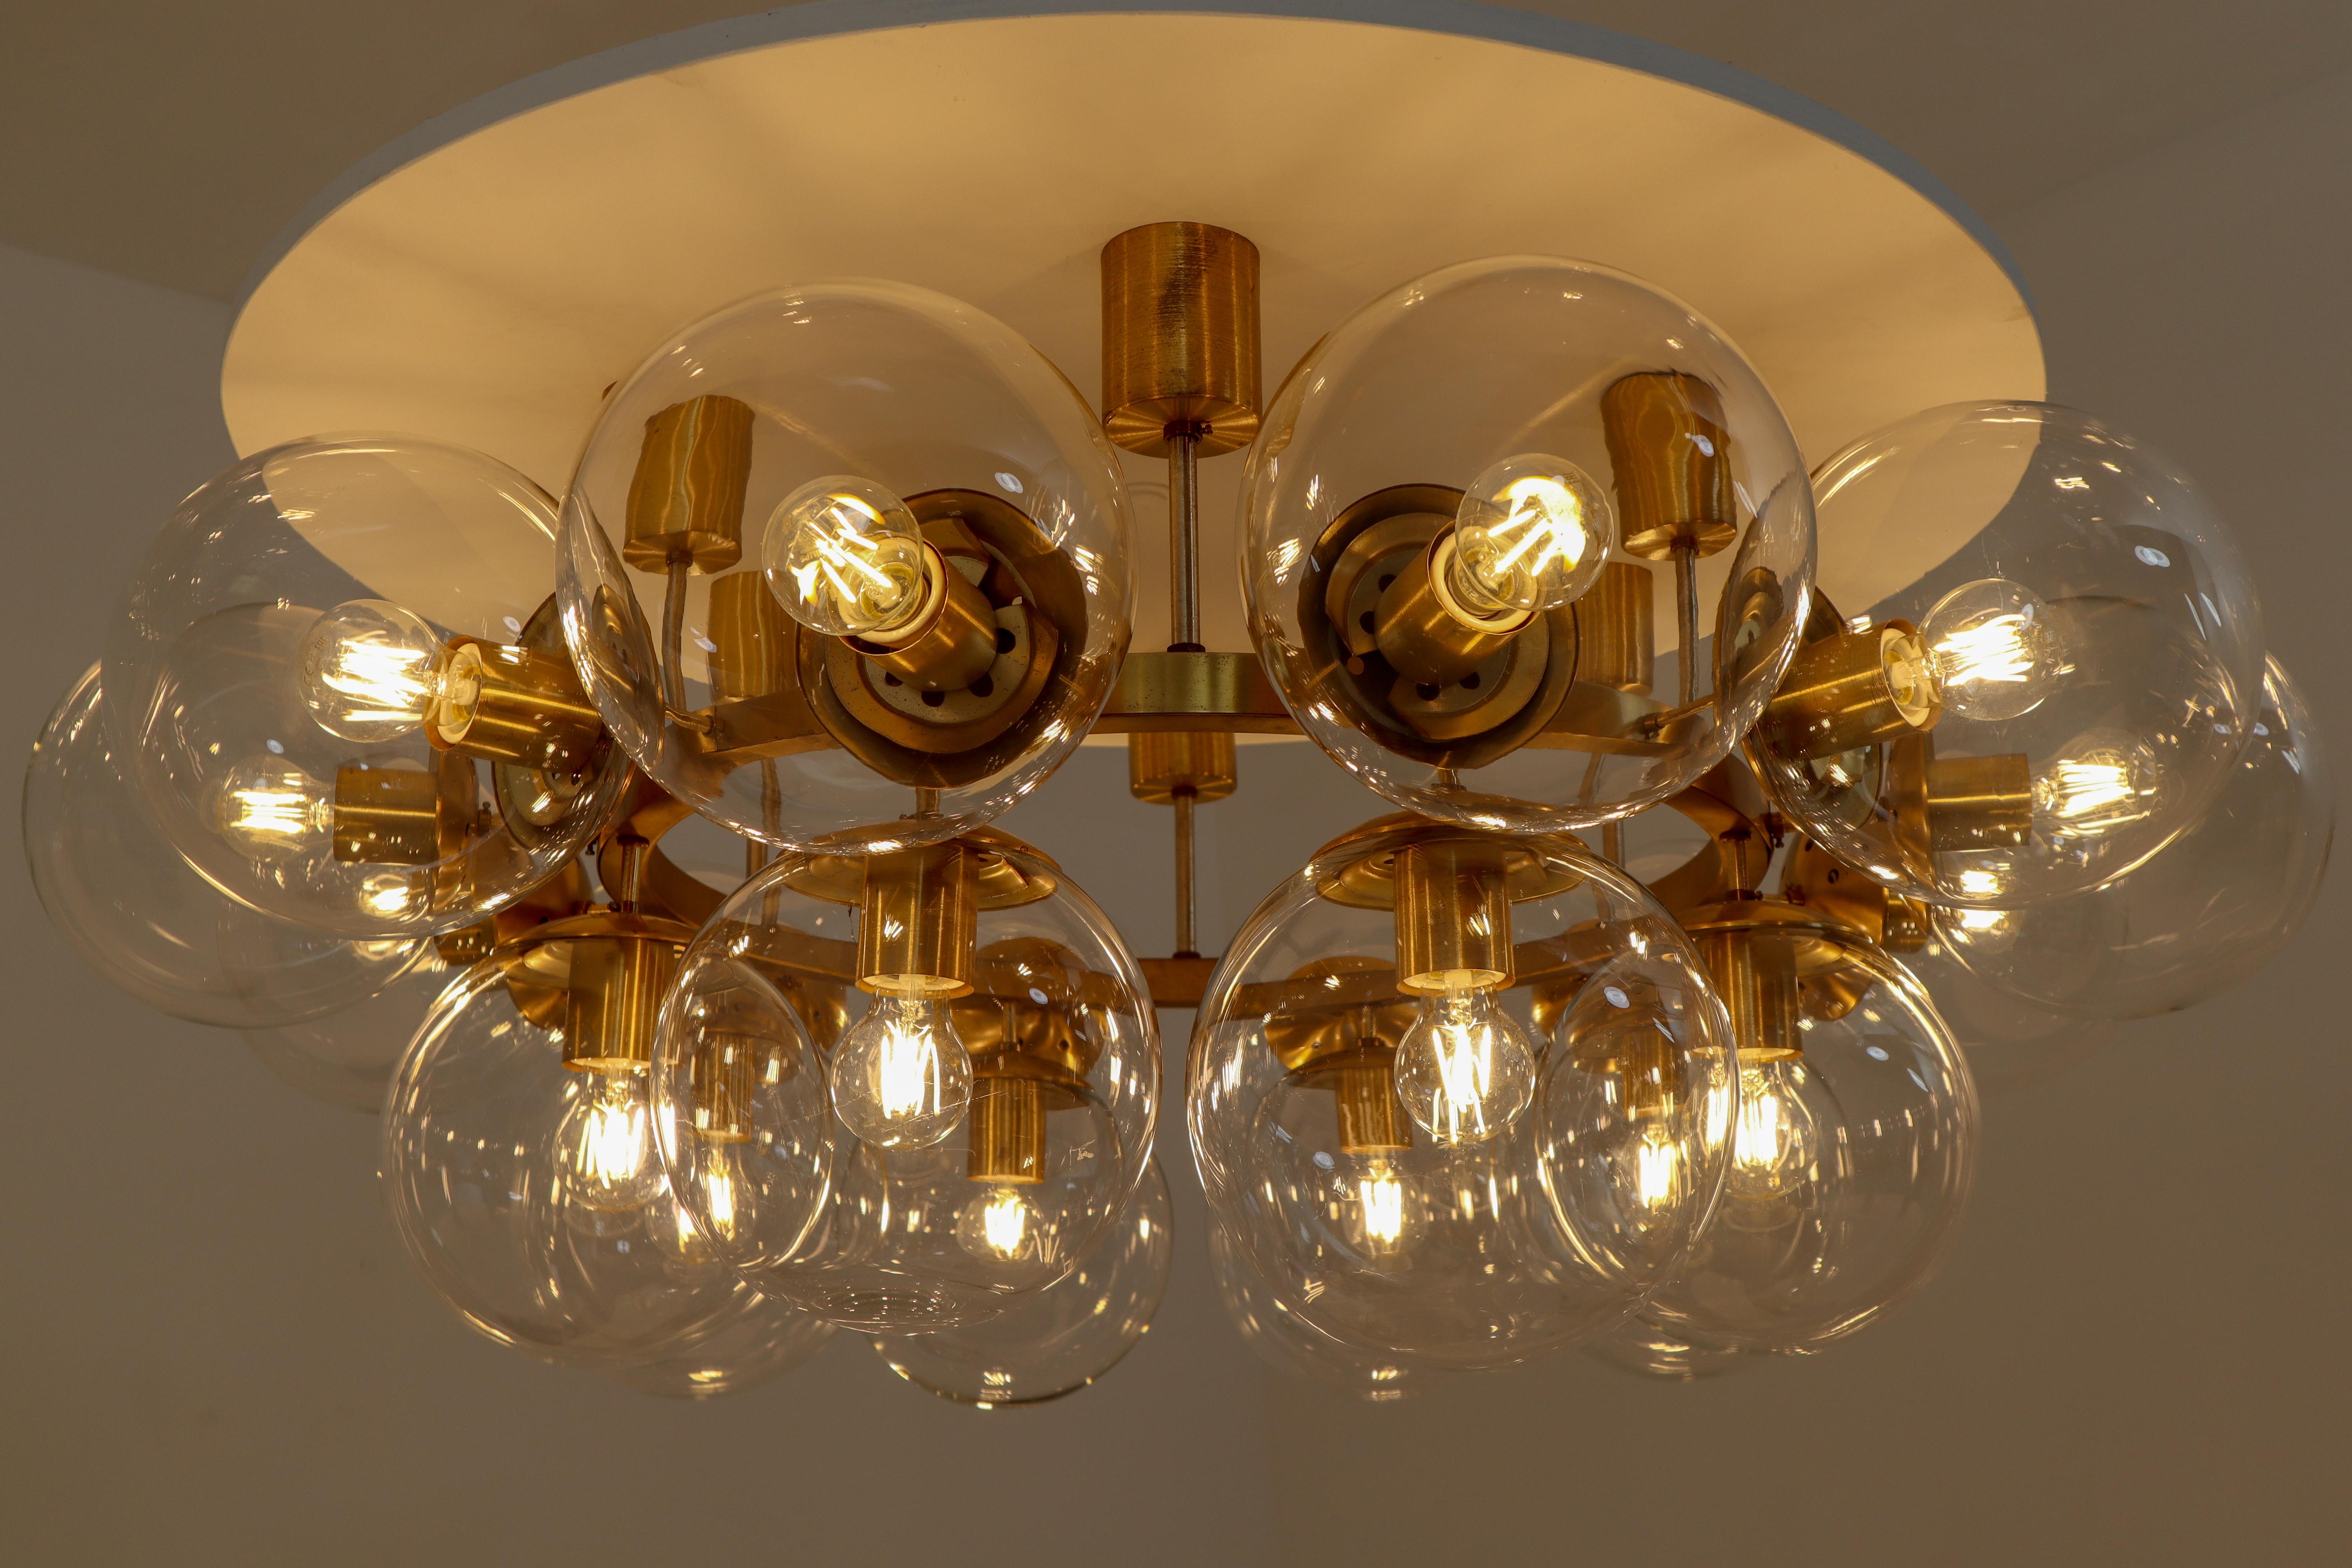 Large Hotel Chandelier in Brass Fixture and 20 Large Hand-Blowed Glass Globes  11